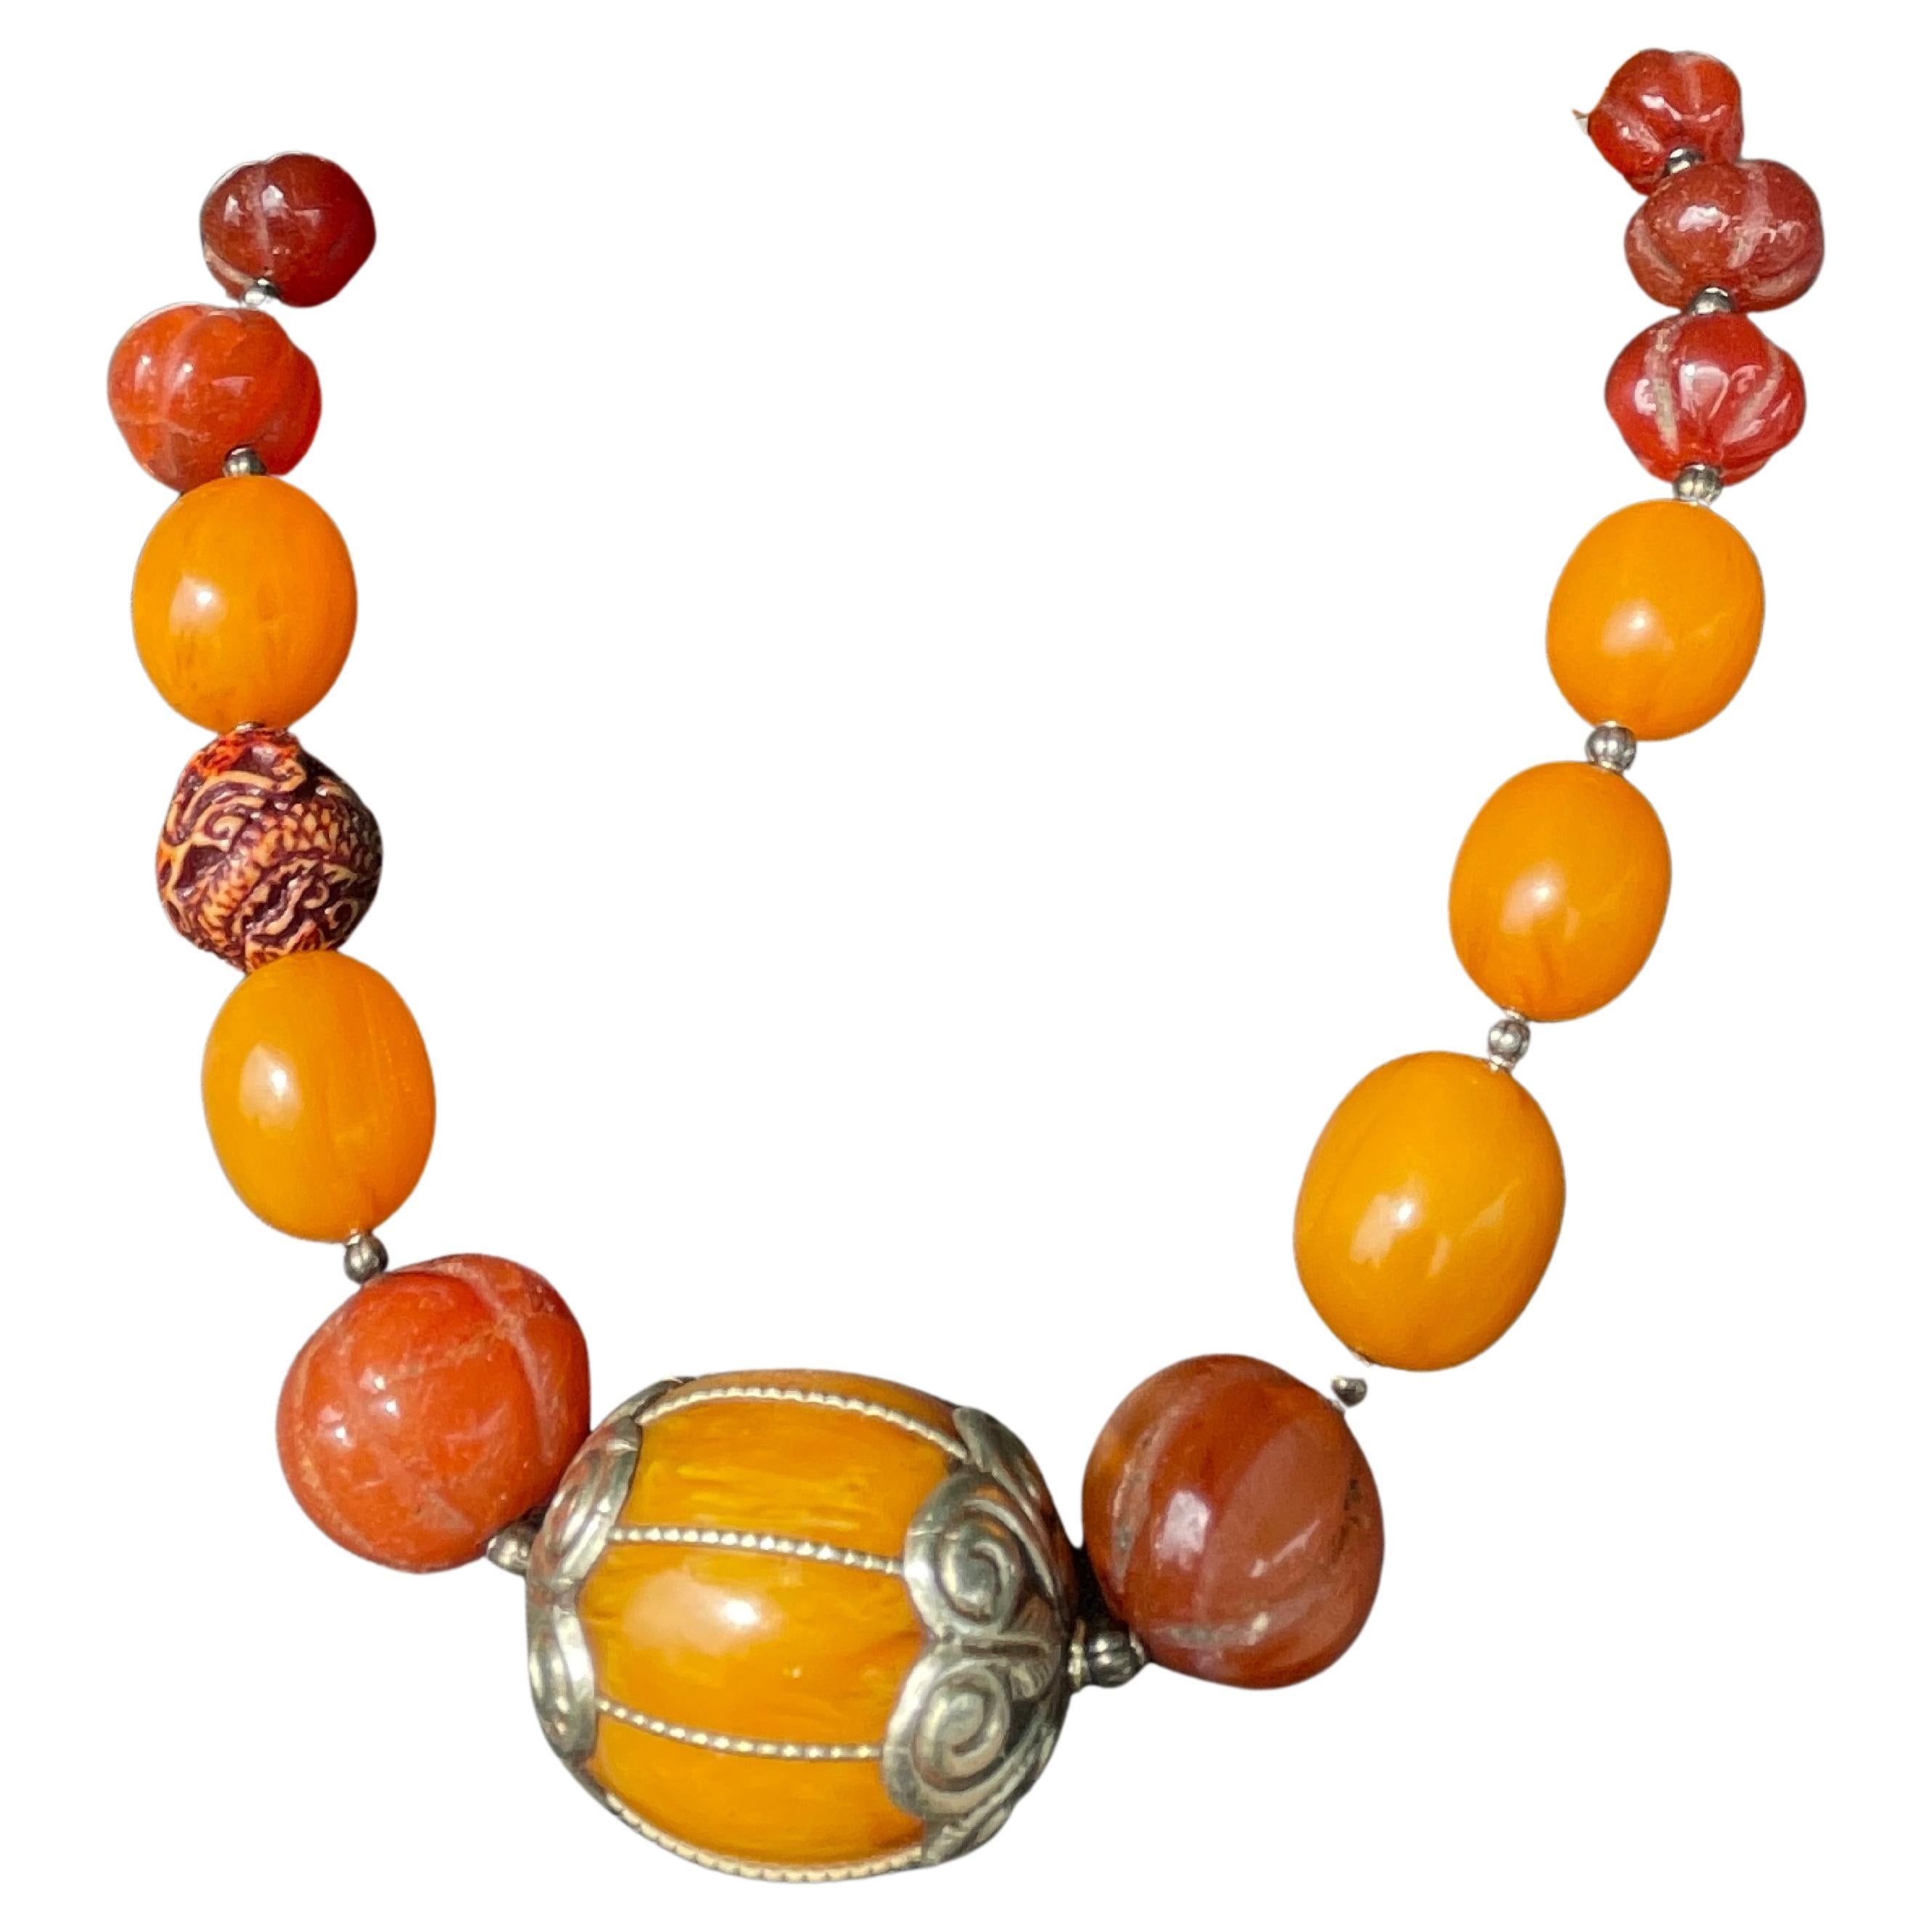 LB Tribal style Amber Bakelite Vintage Carnelian beads Silver necklace on offer For Sale